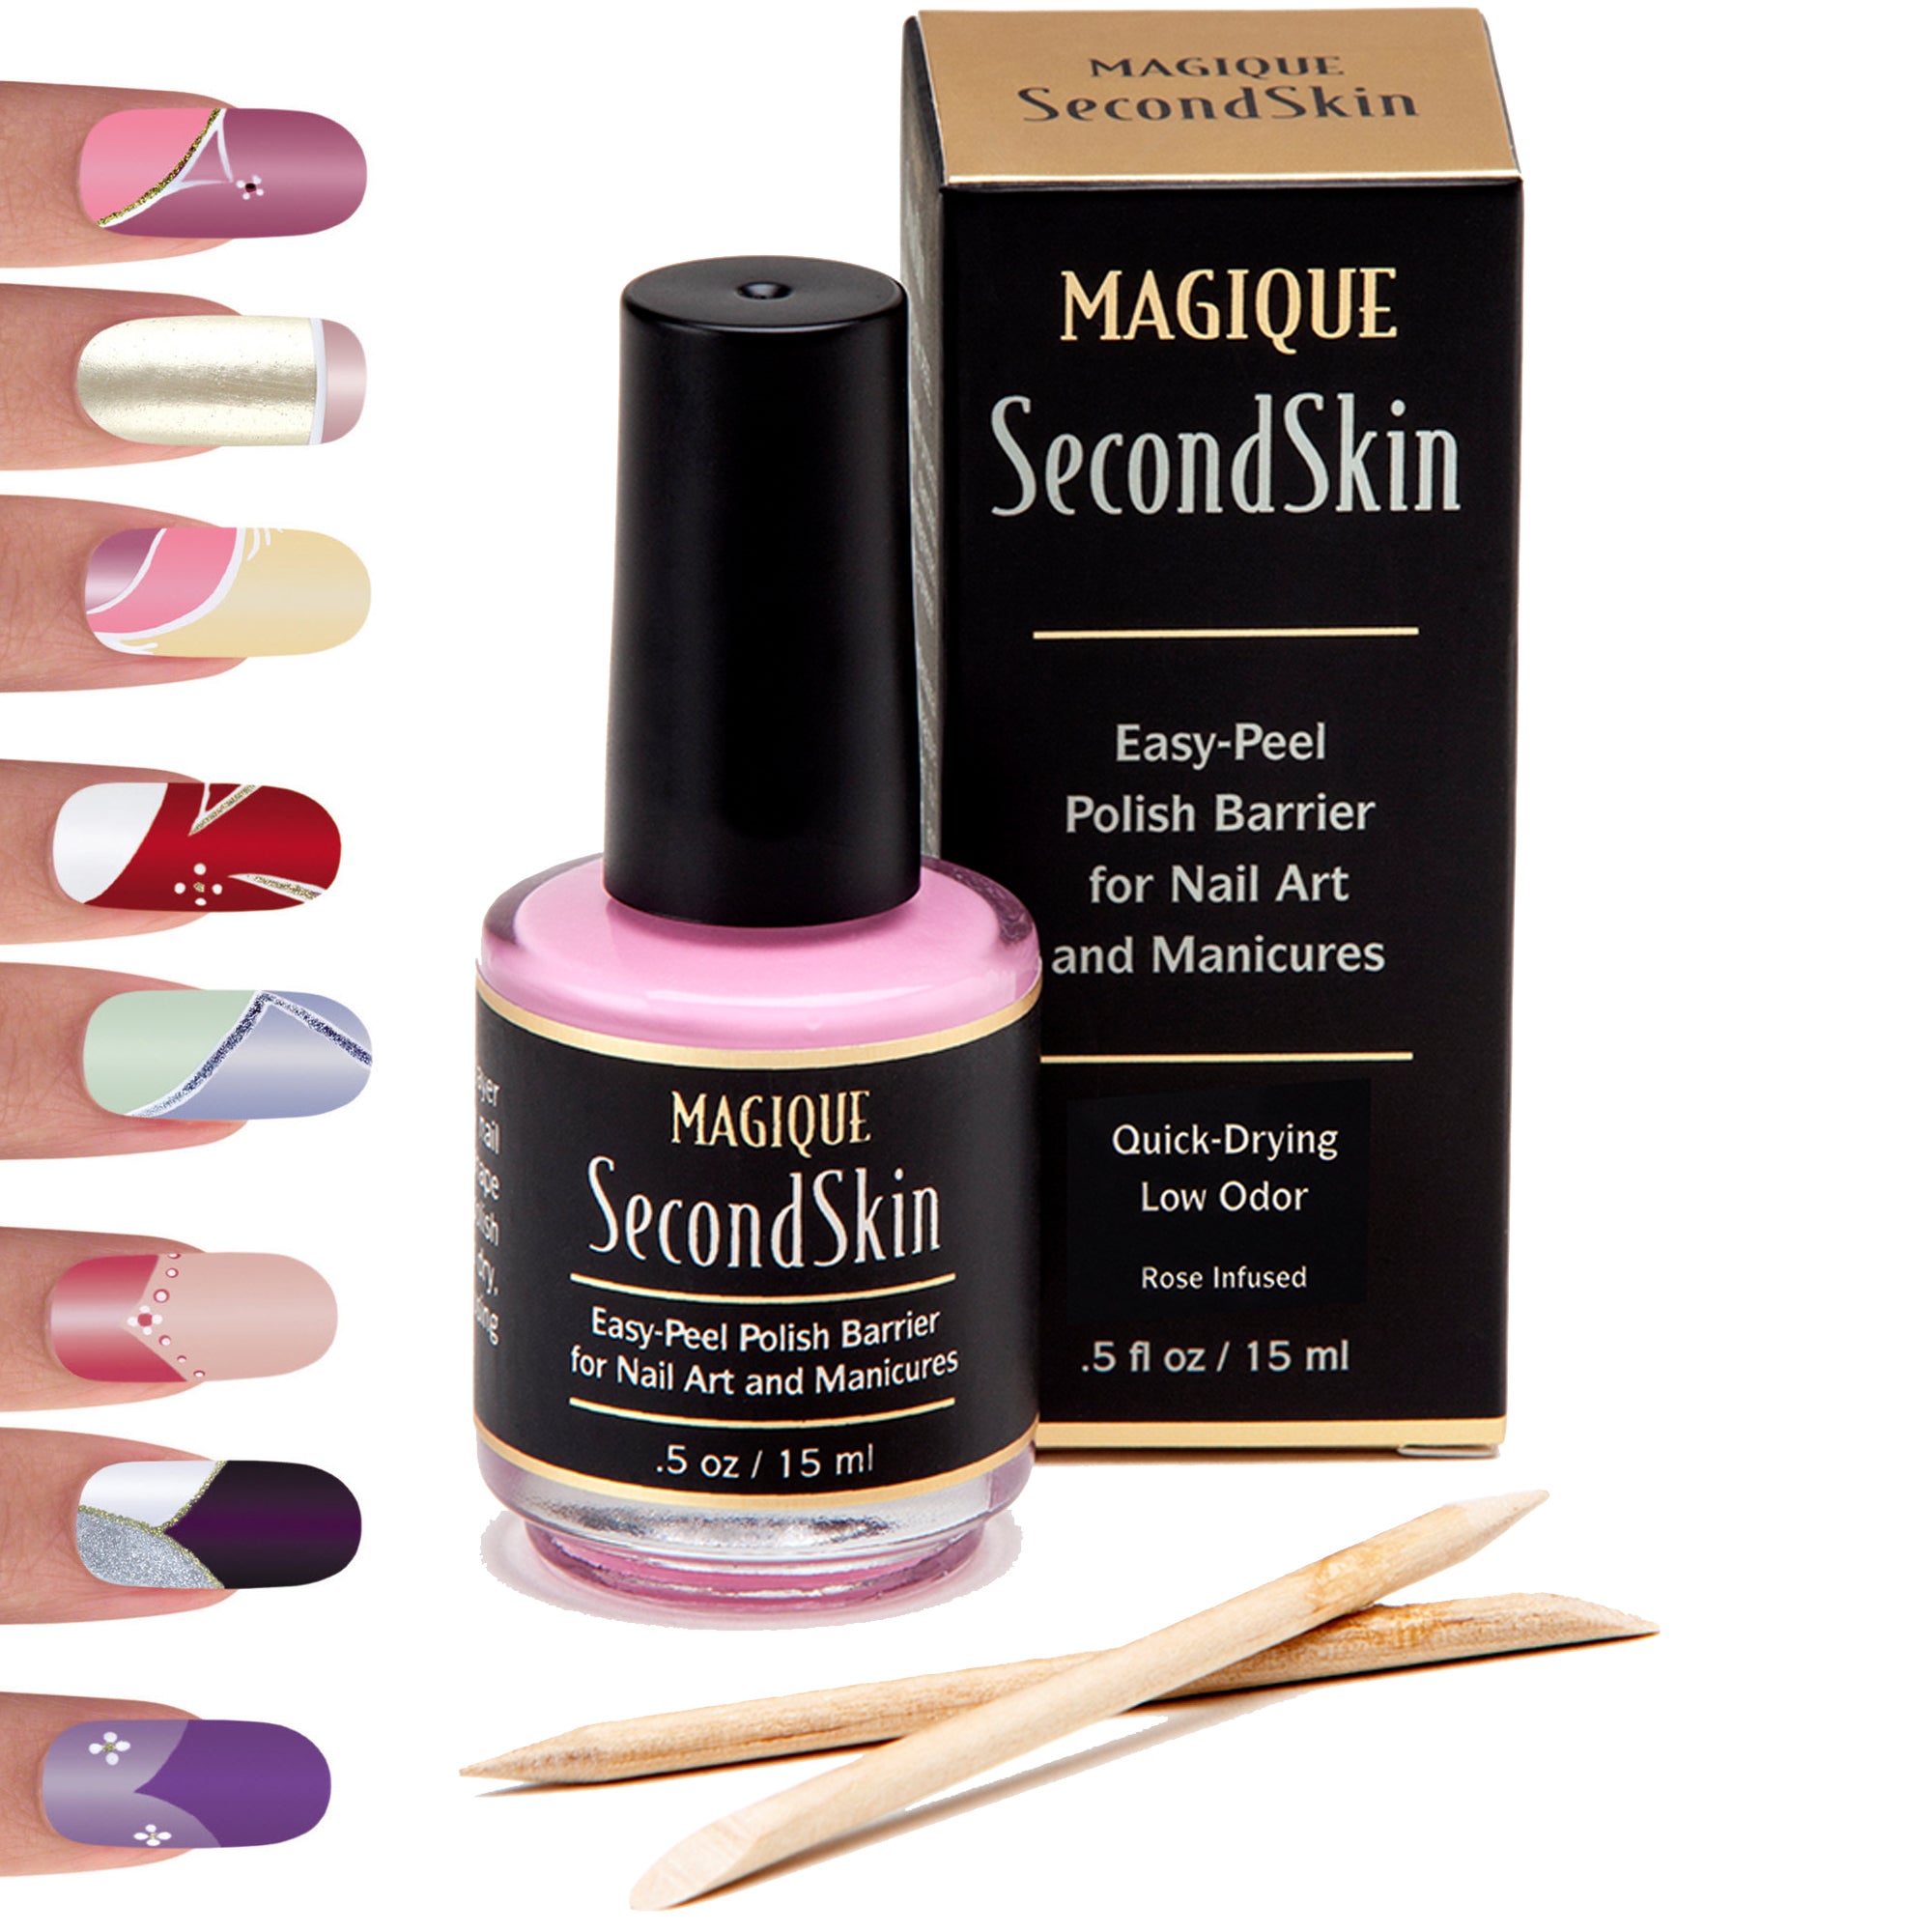 Magique Second Skin Easy-Peel Polish Barrier For Nail Art And Manicures